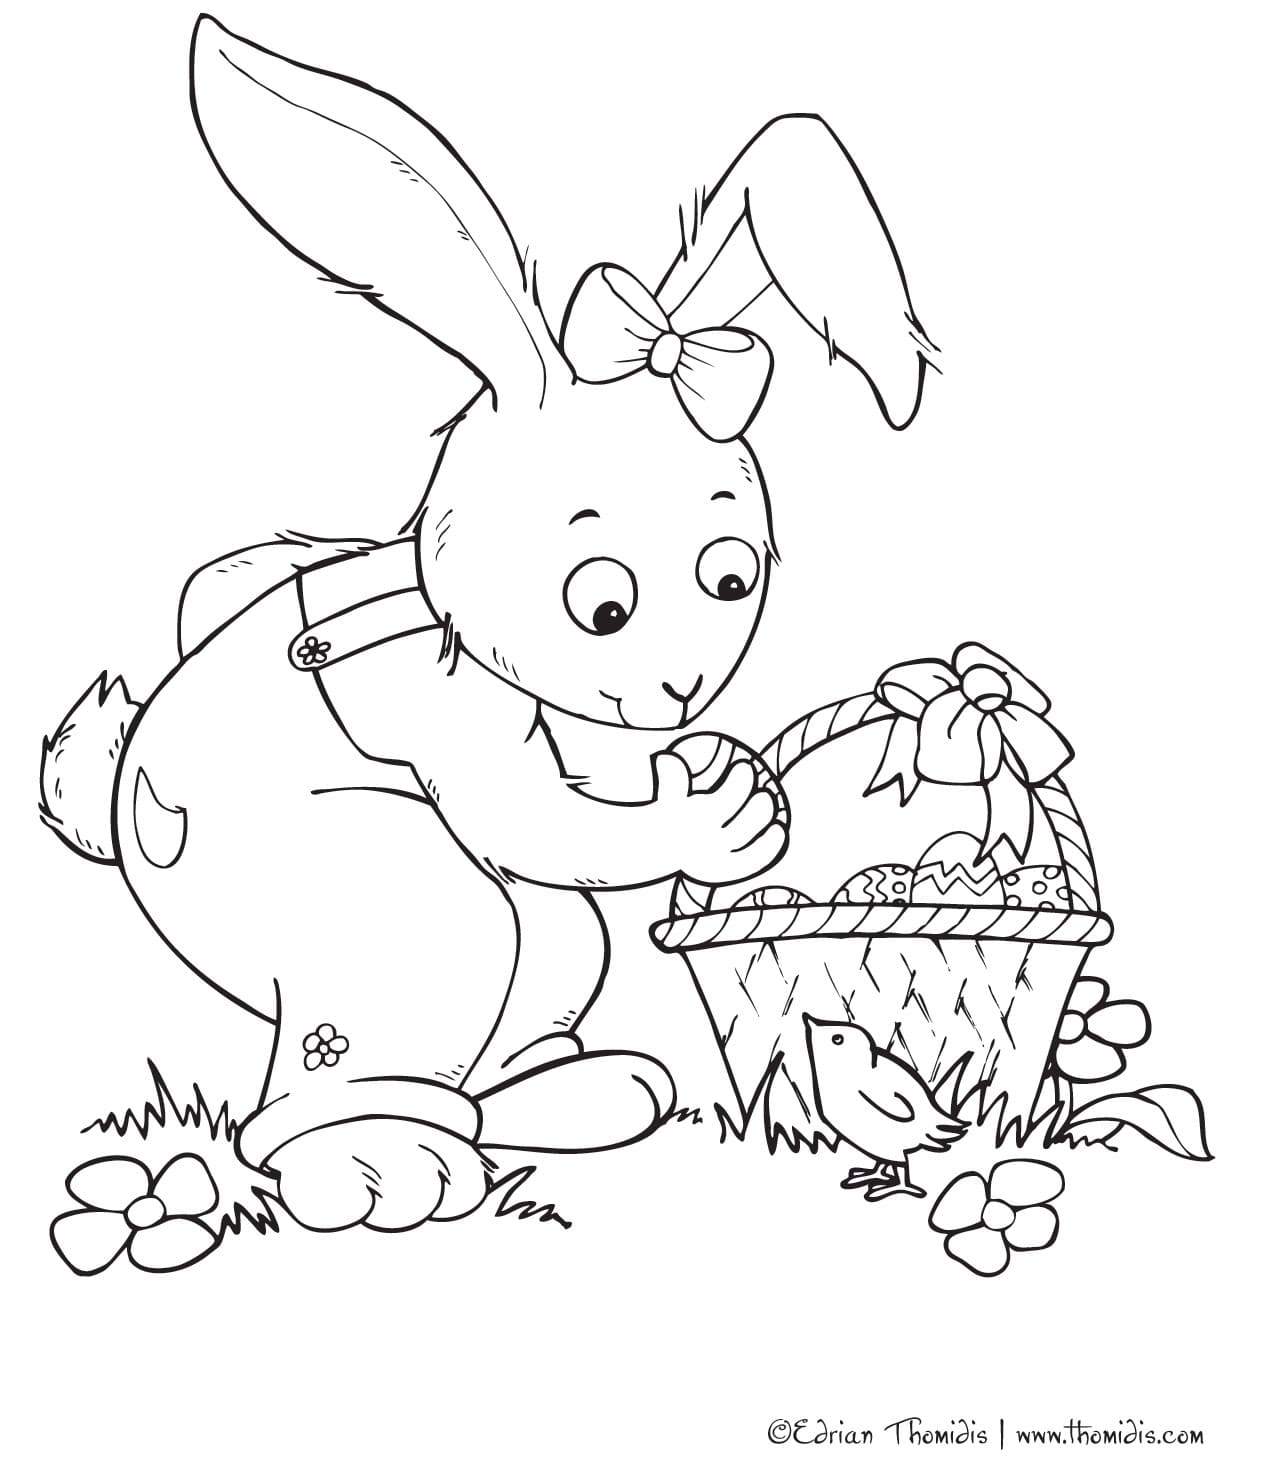 Cute Easter Bunny Image For Children